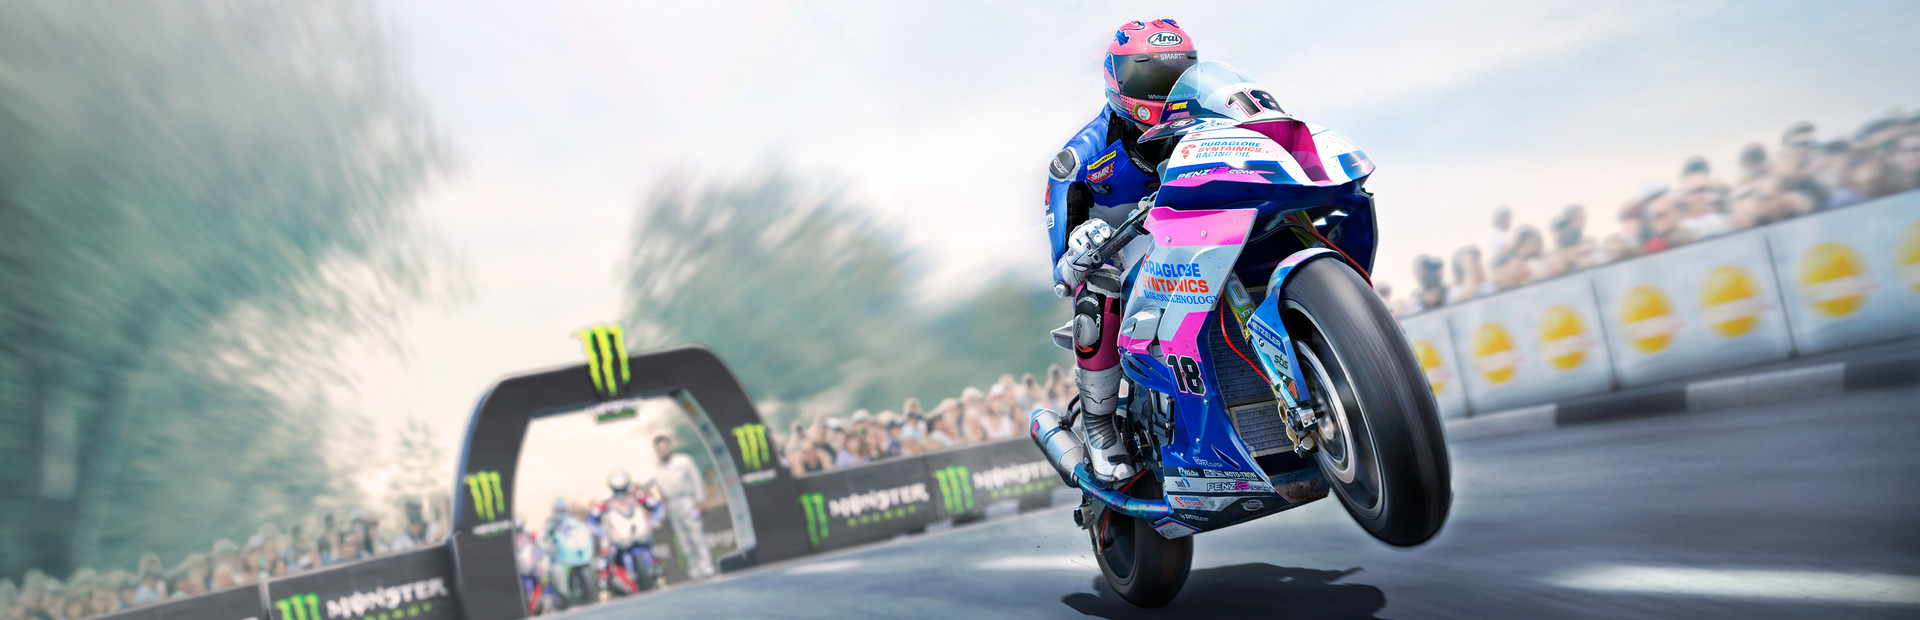 TT Isle of Man: Ride on the Edge 2 cover image